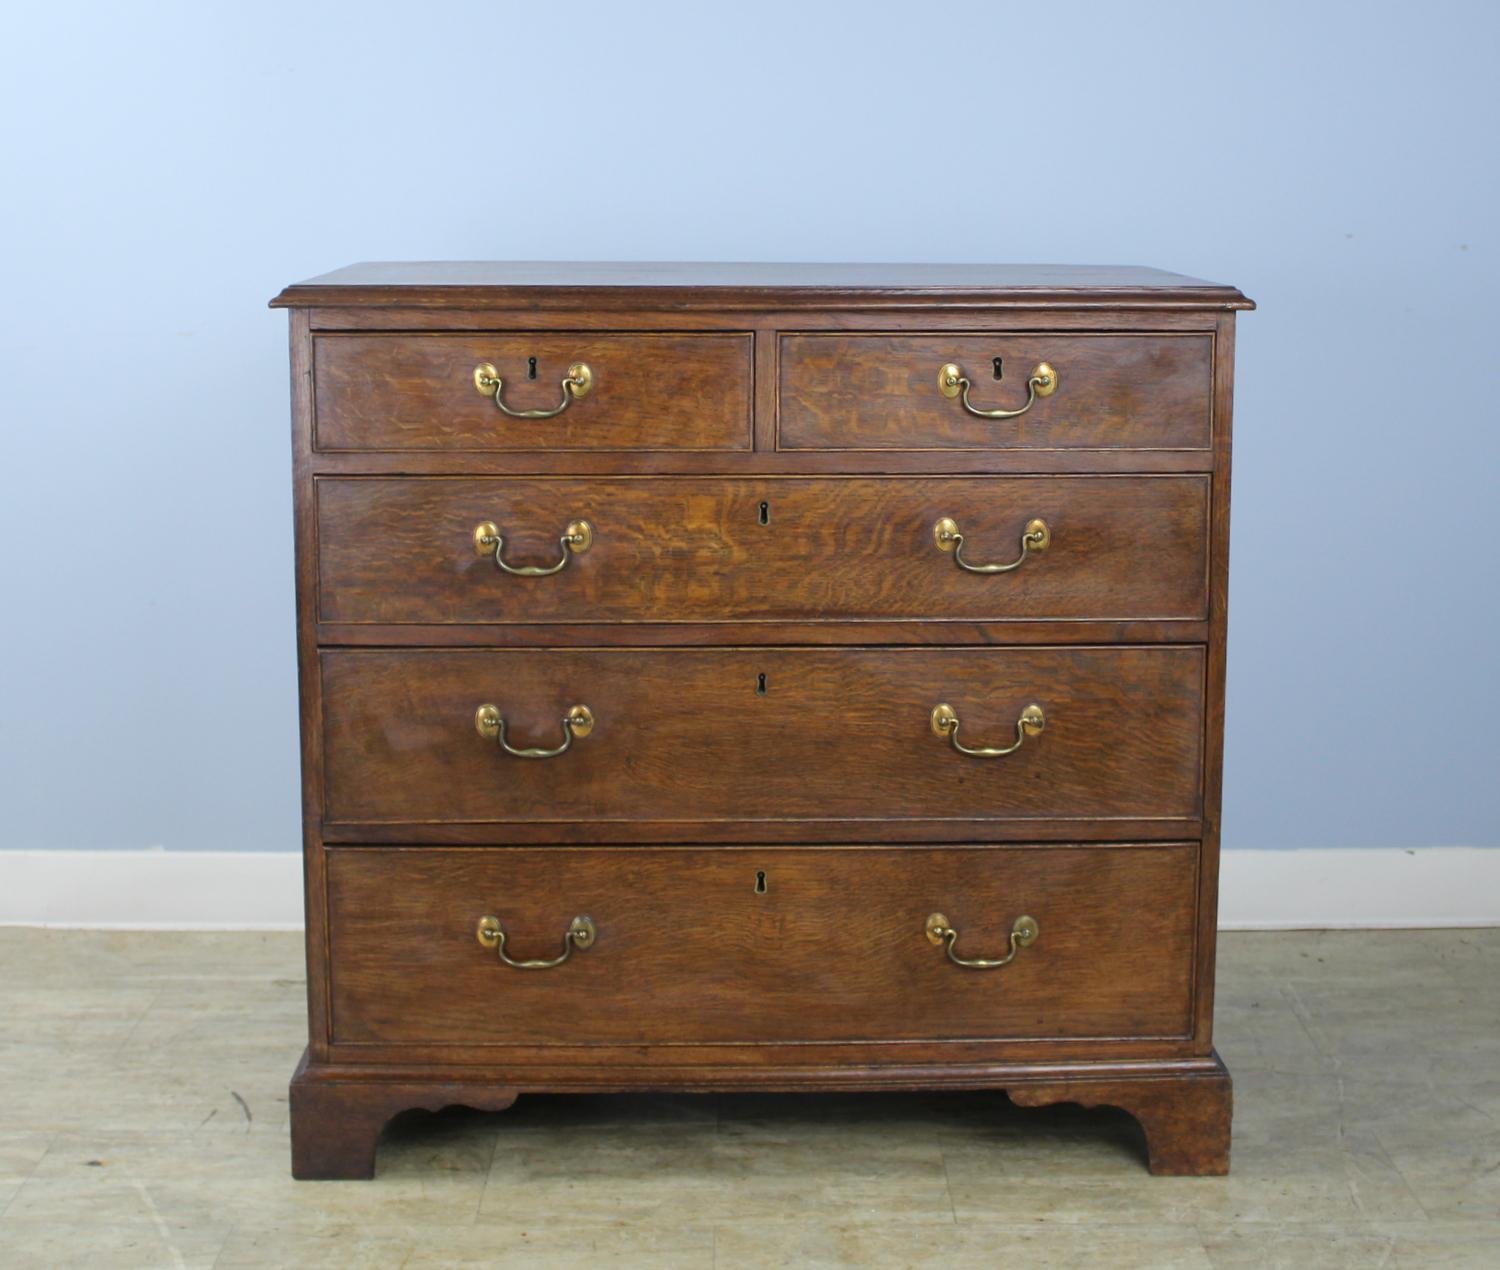 A lovely early Welsh chest in very good antique condition. Two over three, the bureau has a very good color and patina, with fine oak grain on the top. The ogee feet are original, as are the drawers' cockbeaded edges and brass hardware.